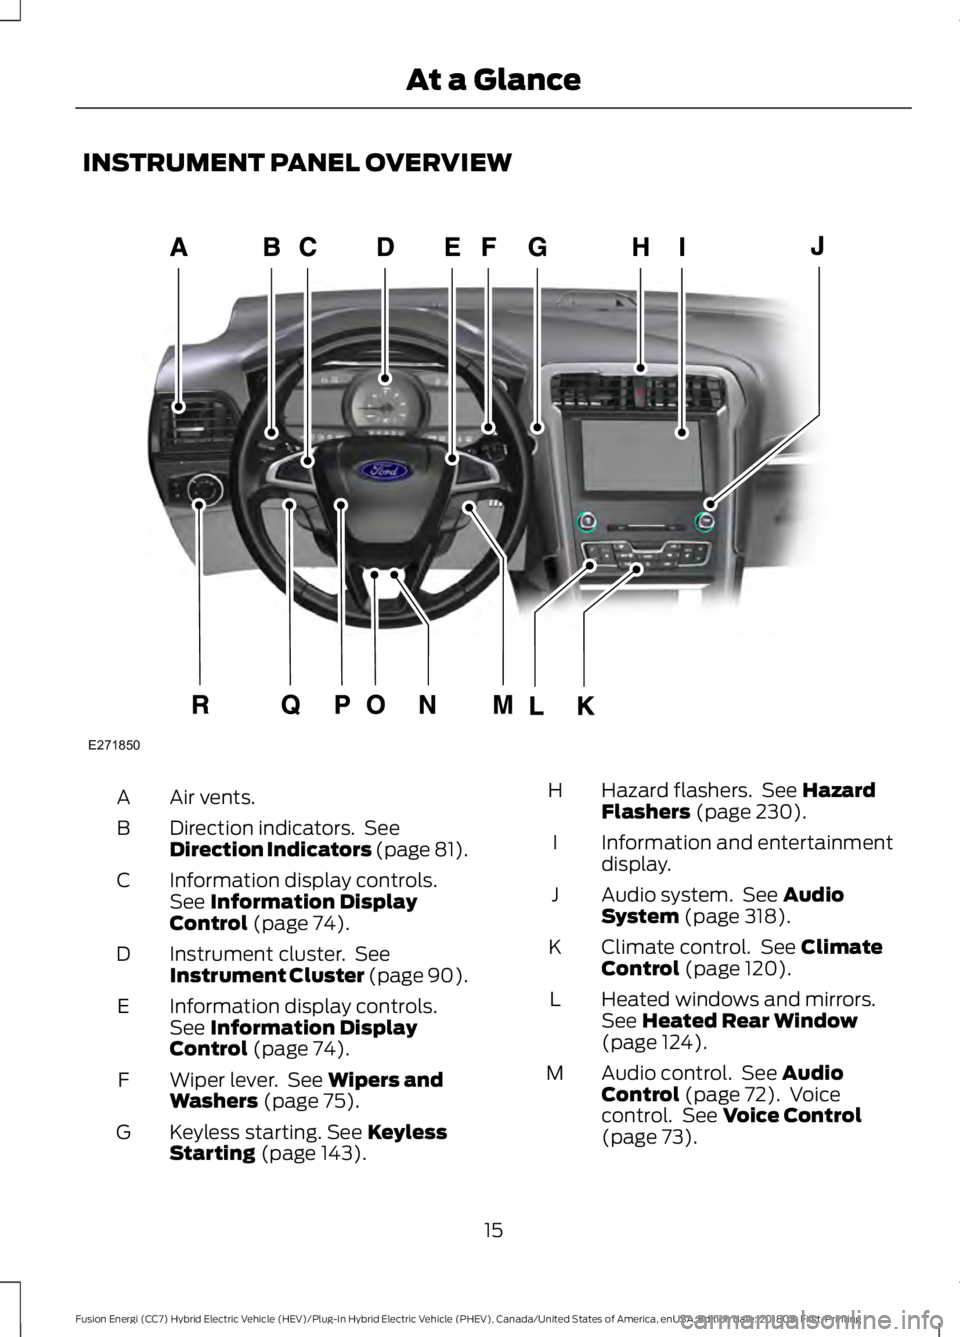 FORD FUSION HYBRID 2019 User Guide INSTRUMENT PANEL OVERVIEW
Air vents.
A
Direction indicators.  See
Direction Indicators (page 81).
B
Information display controls.
See Information Display
Control (page 74).
C
Instrument cluster.  See
